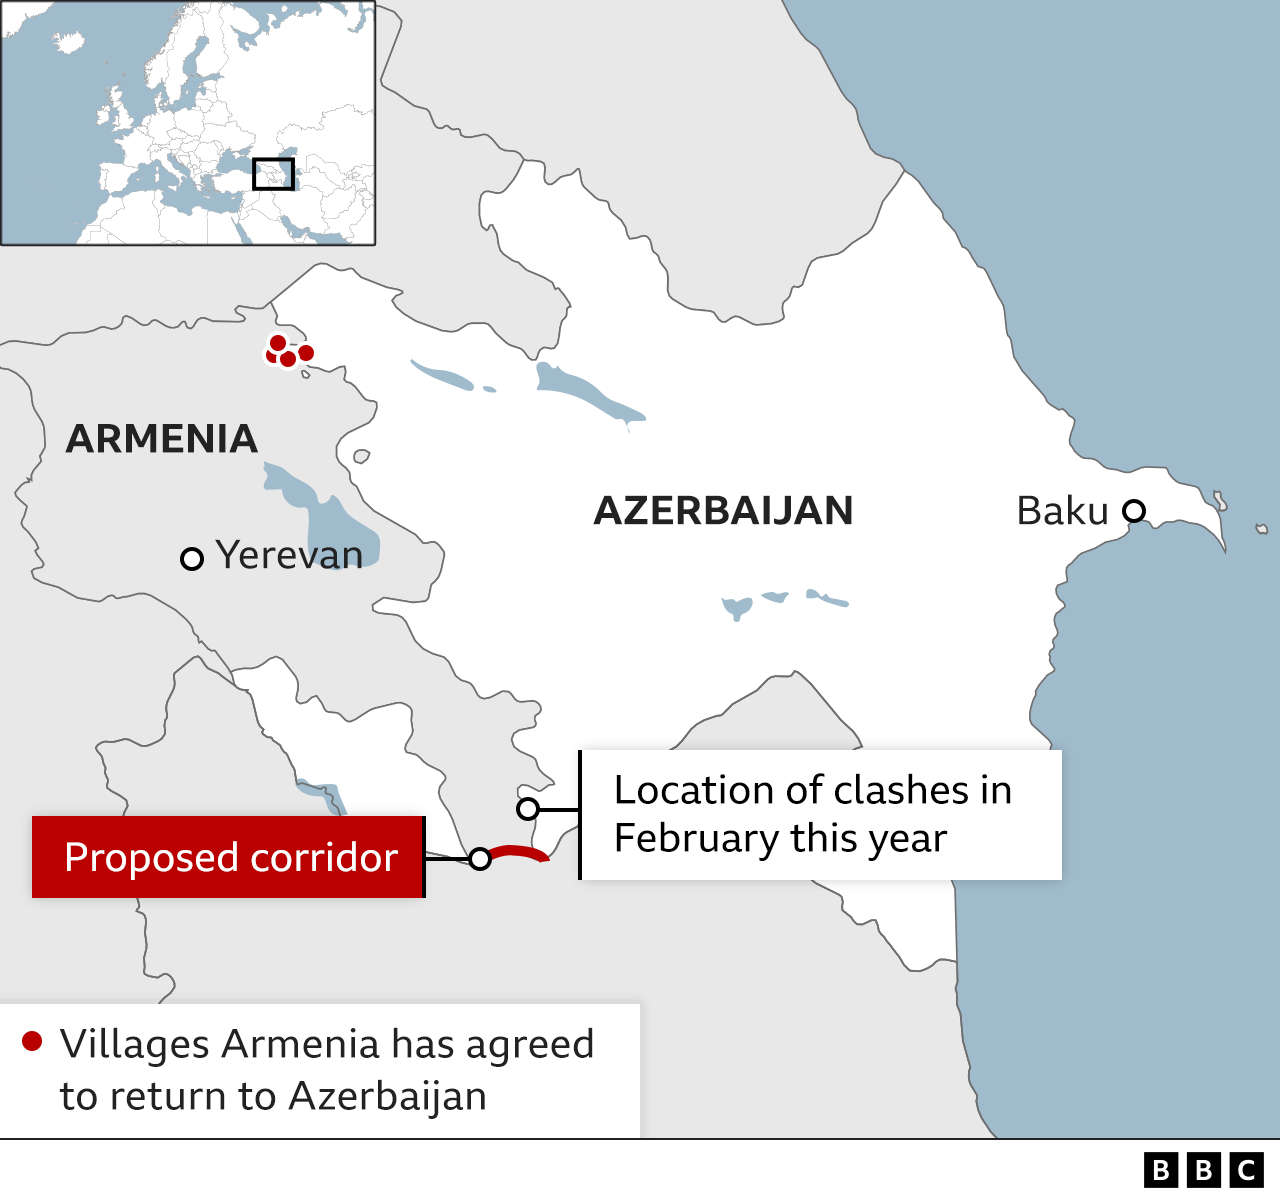 A map showing Armenia and Azerbaijan, highlighting the proposed corridor and the location of the clashes in February this year